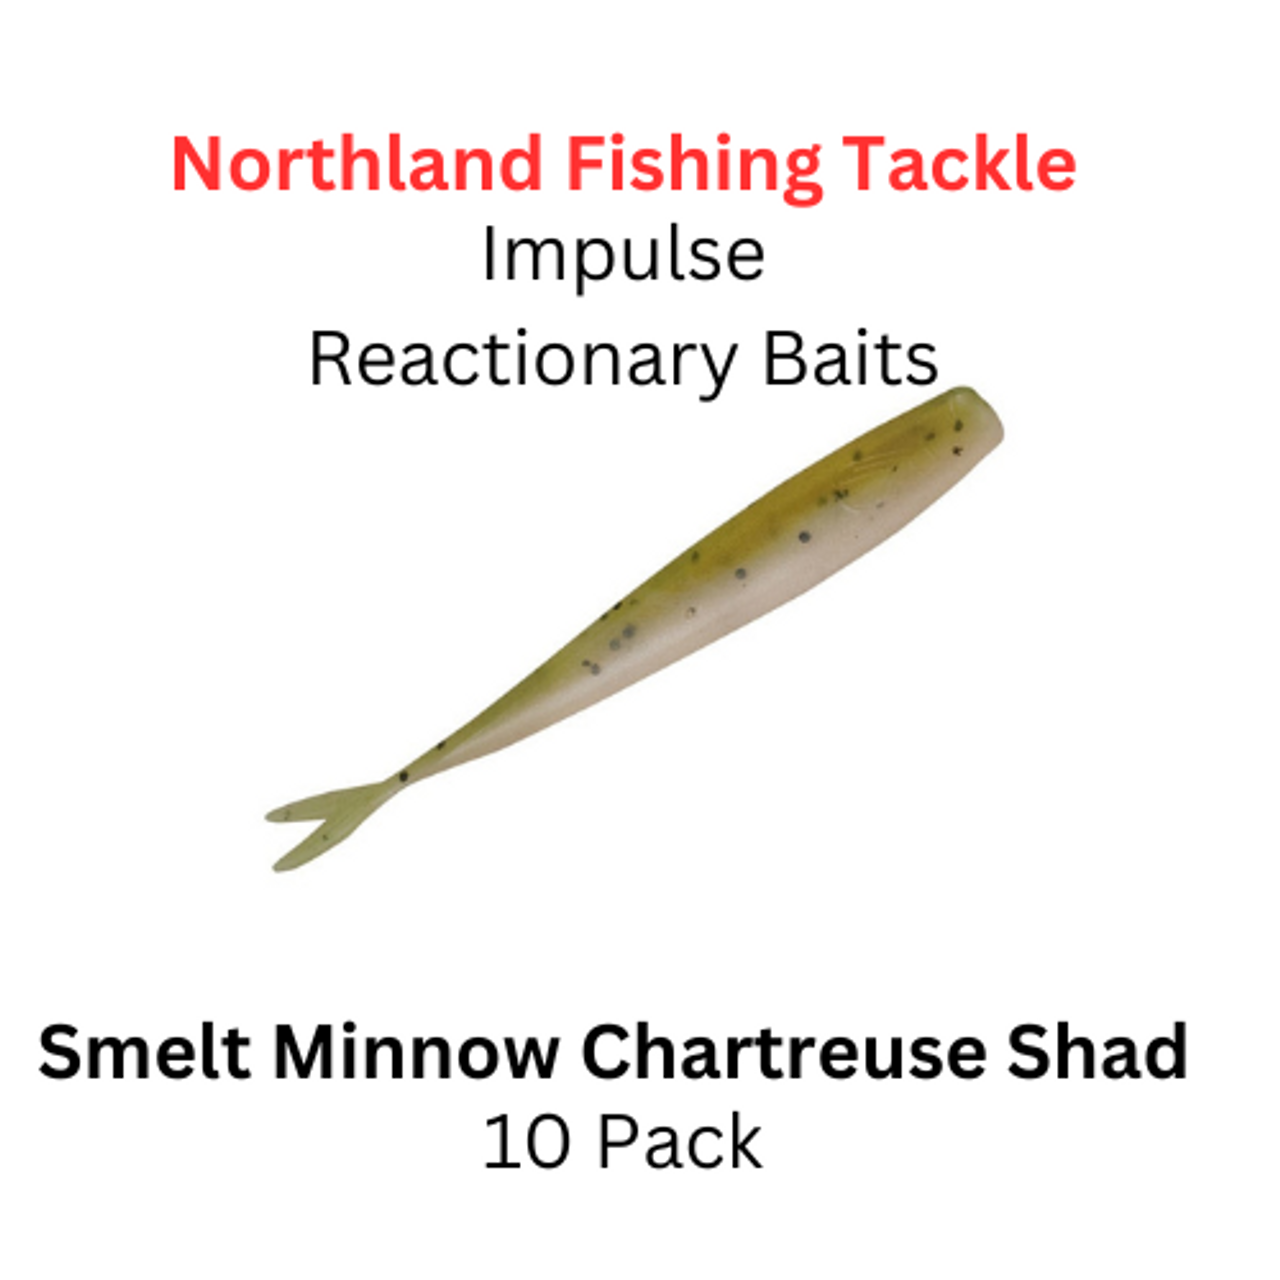 https://cdn11.bigcommerce.com/s-u9nbd/images/stencil/1280x1280/products/6593/16582/northland_fishing_tackle_smelt_minnow_Chartreuse_shad_10_pk_3_inch___86754.1678398196.png?c=2